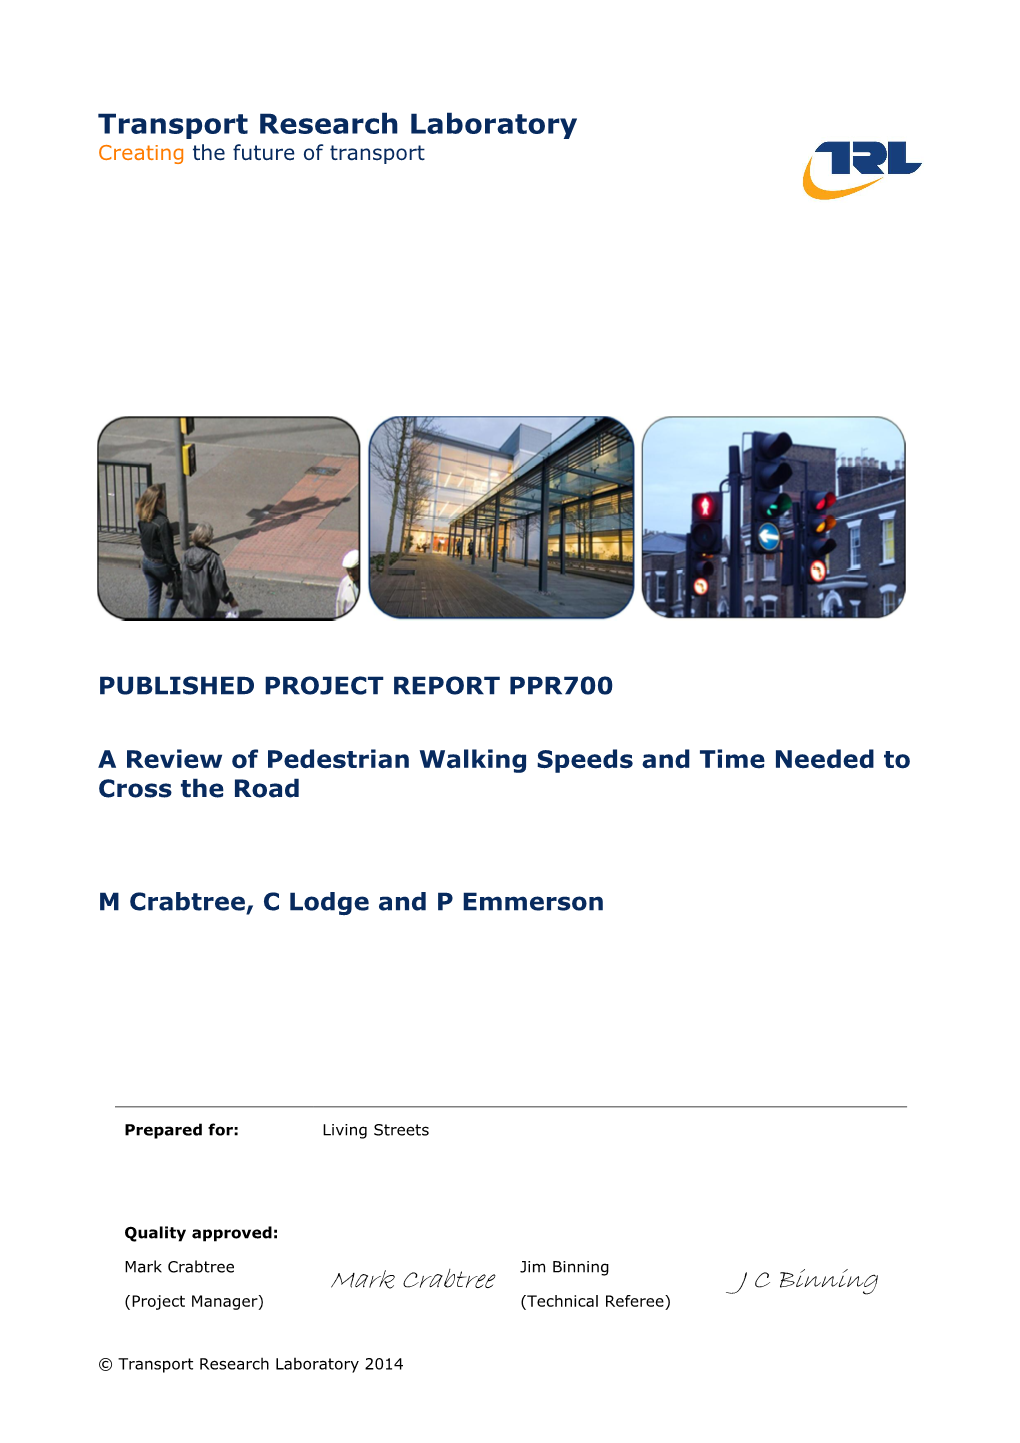 This Report Has Been Produced by the Transport Research Laboratory Under a Contract with Living Streets